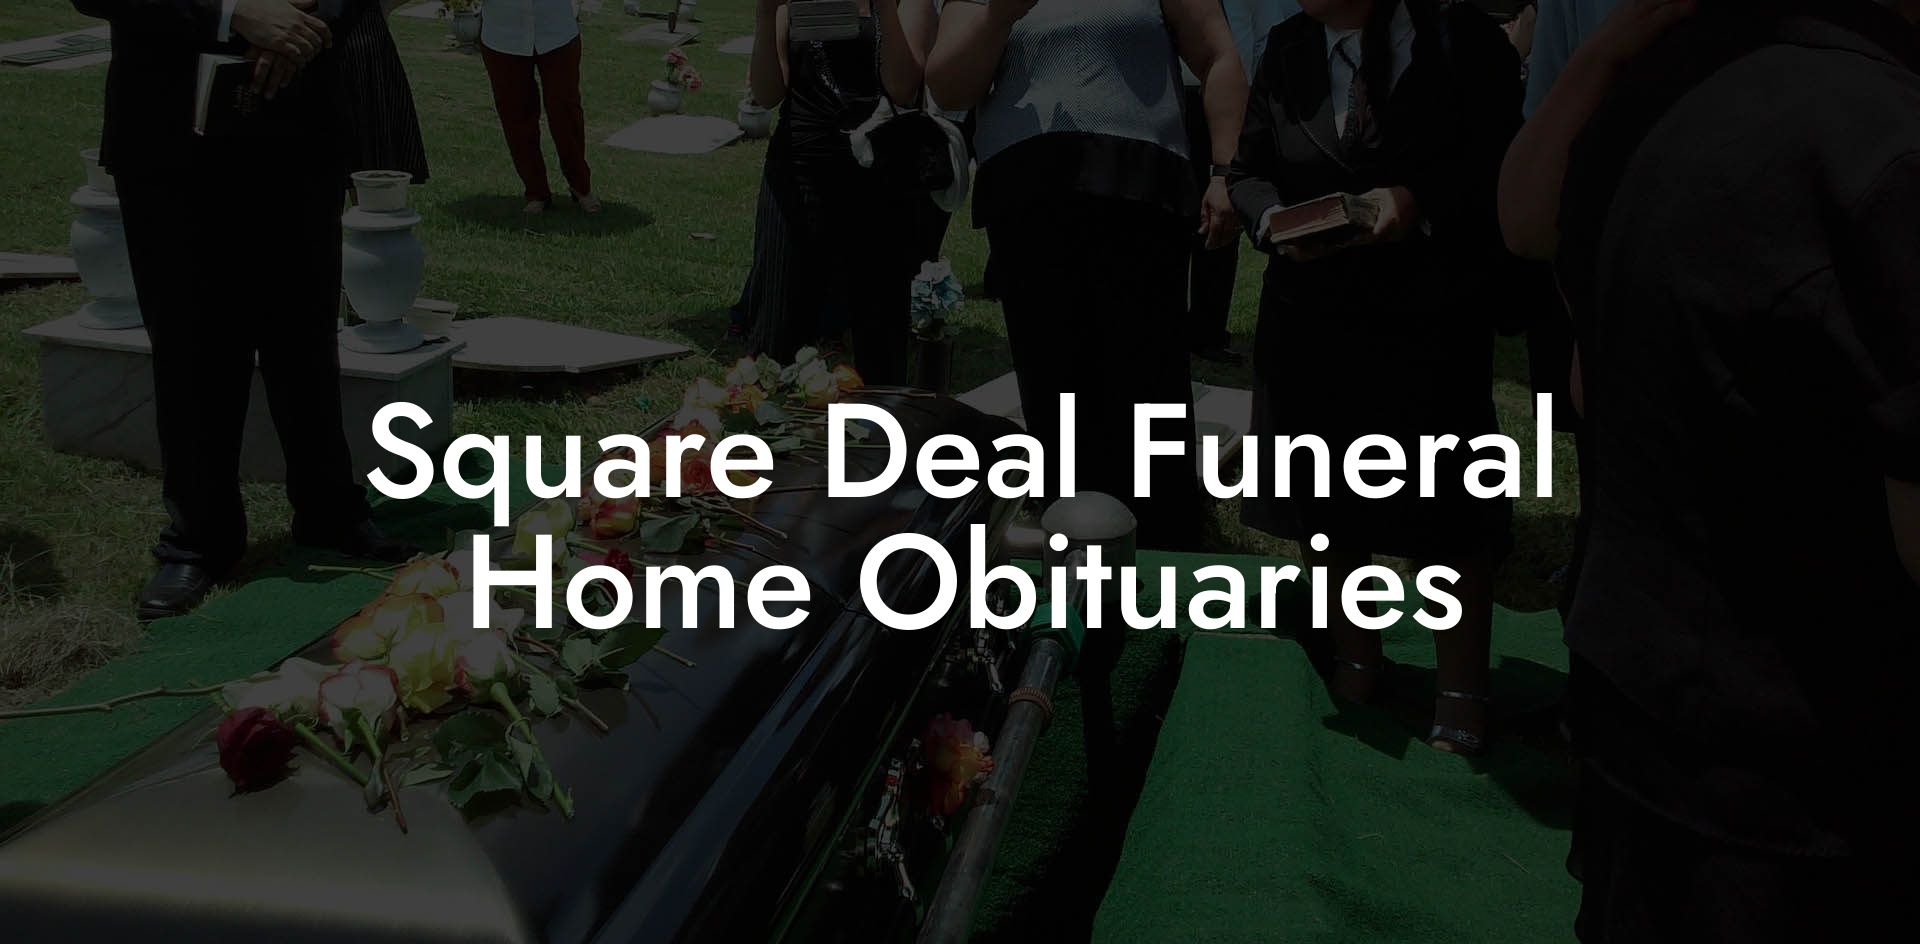 Square Deal Funeral Home Obituaries